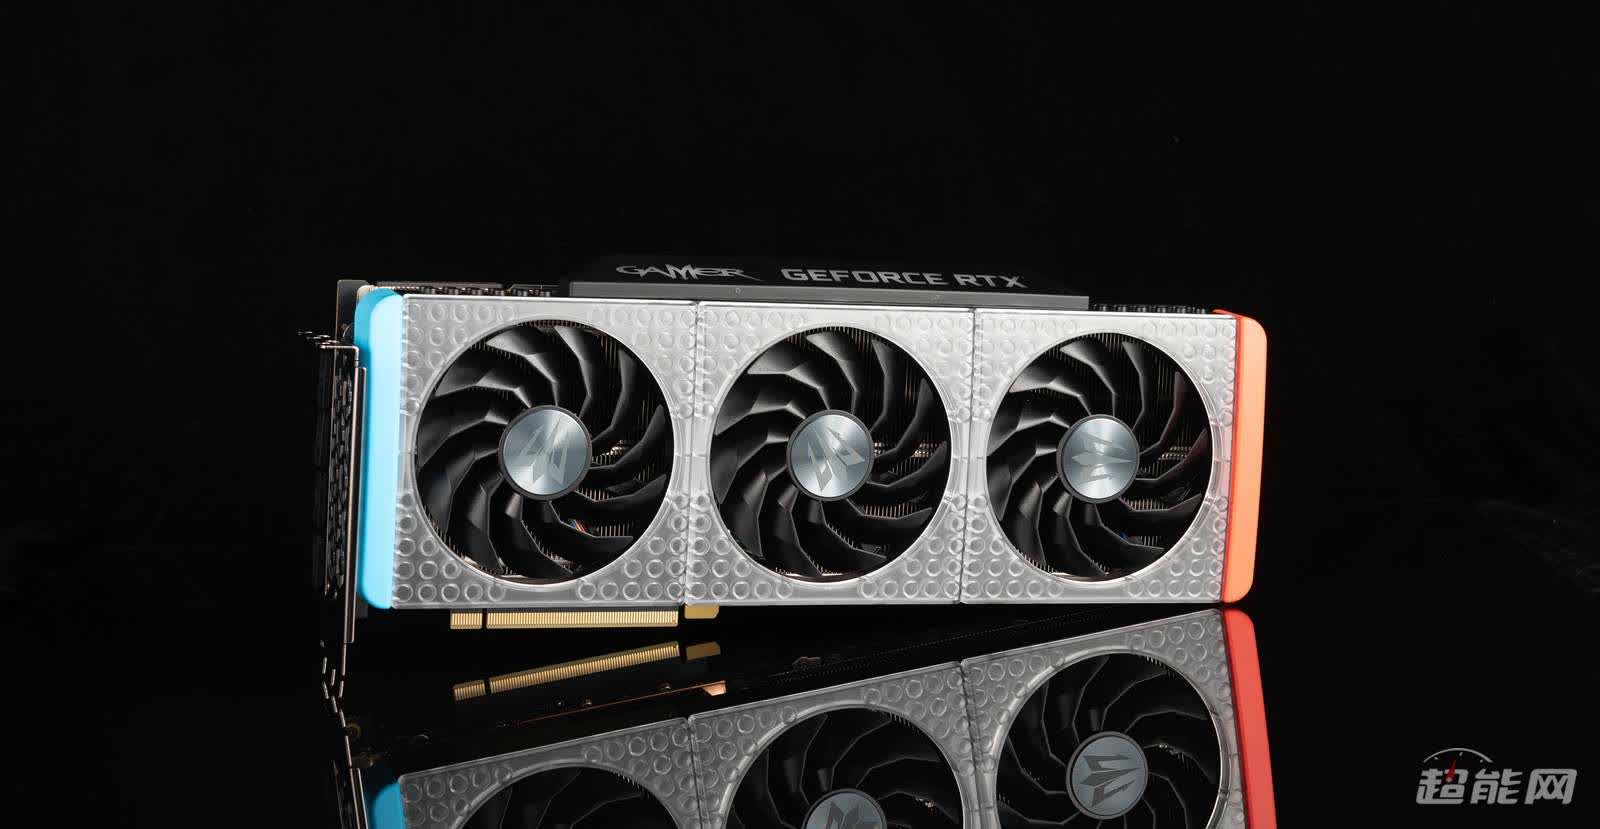 Galax's GeForce RTX 3090 Gamer Edition is the card of Lego fans' dreams